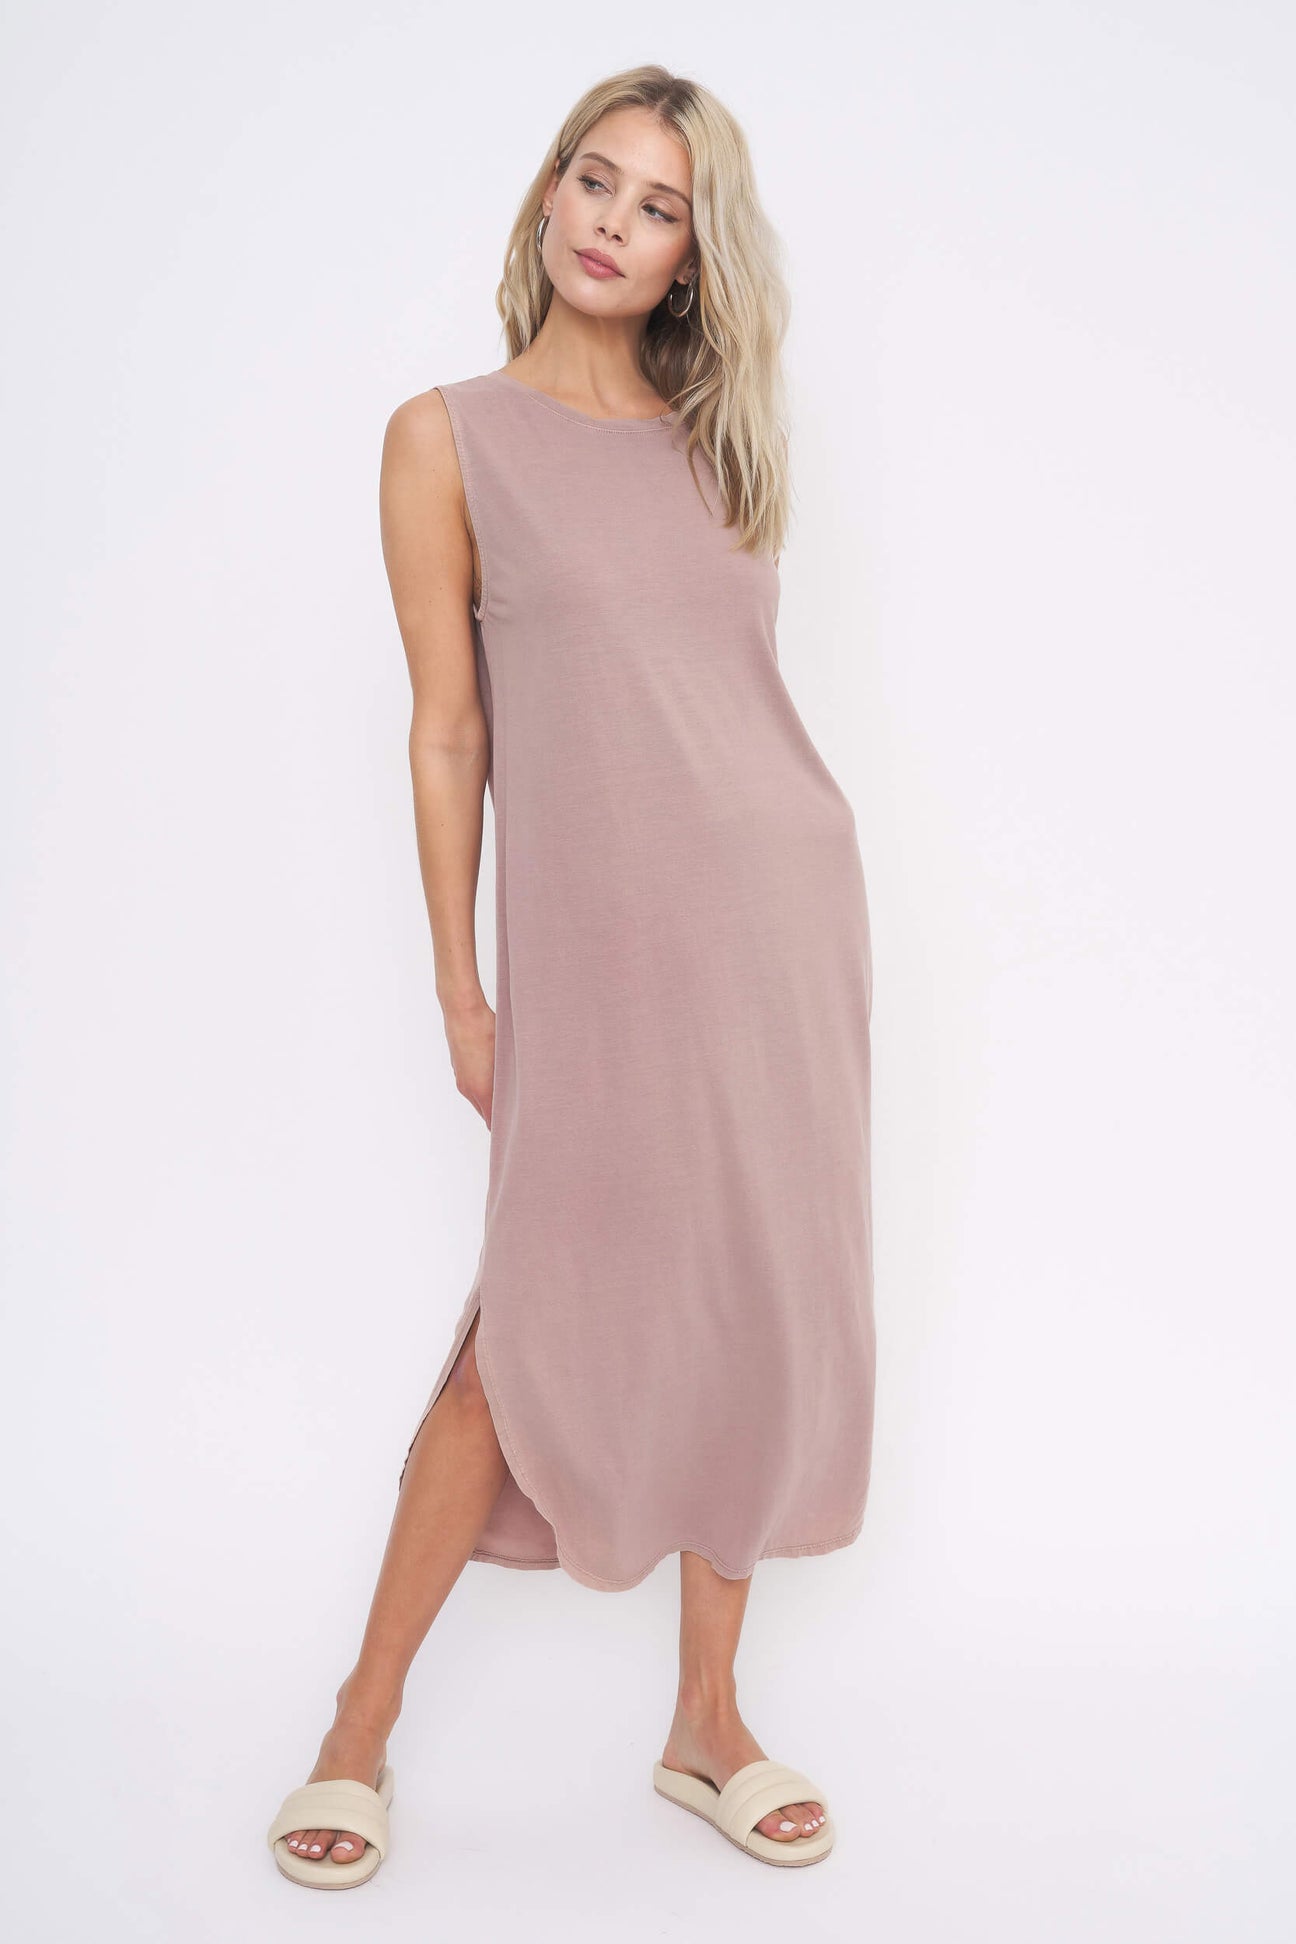 Project Social T- Snap out of it tank dress-DW Mojave Mauve